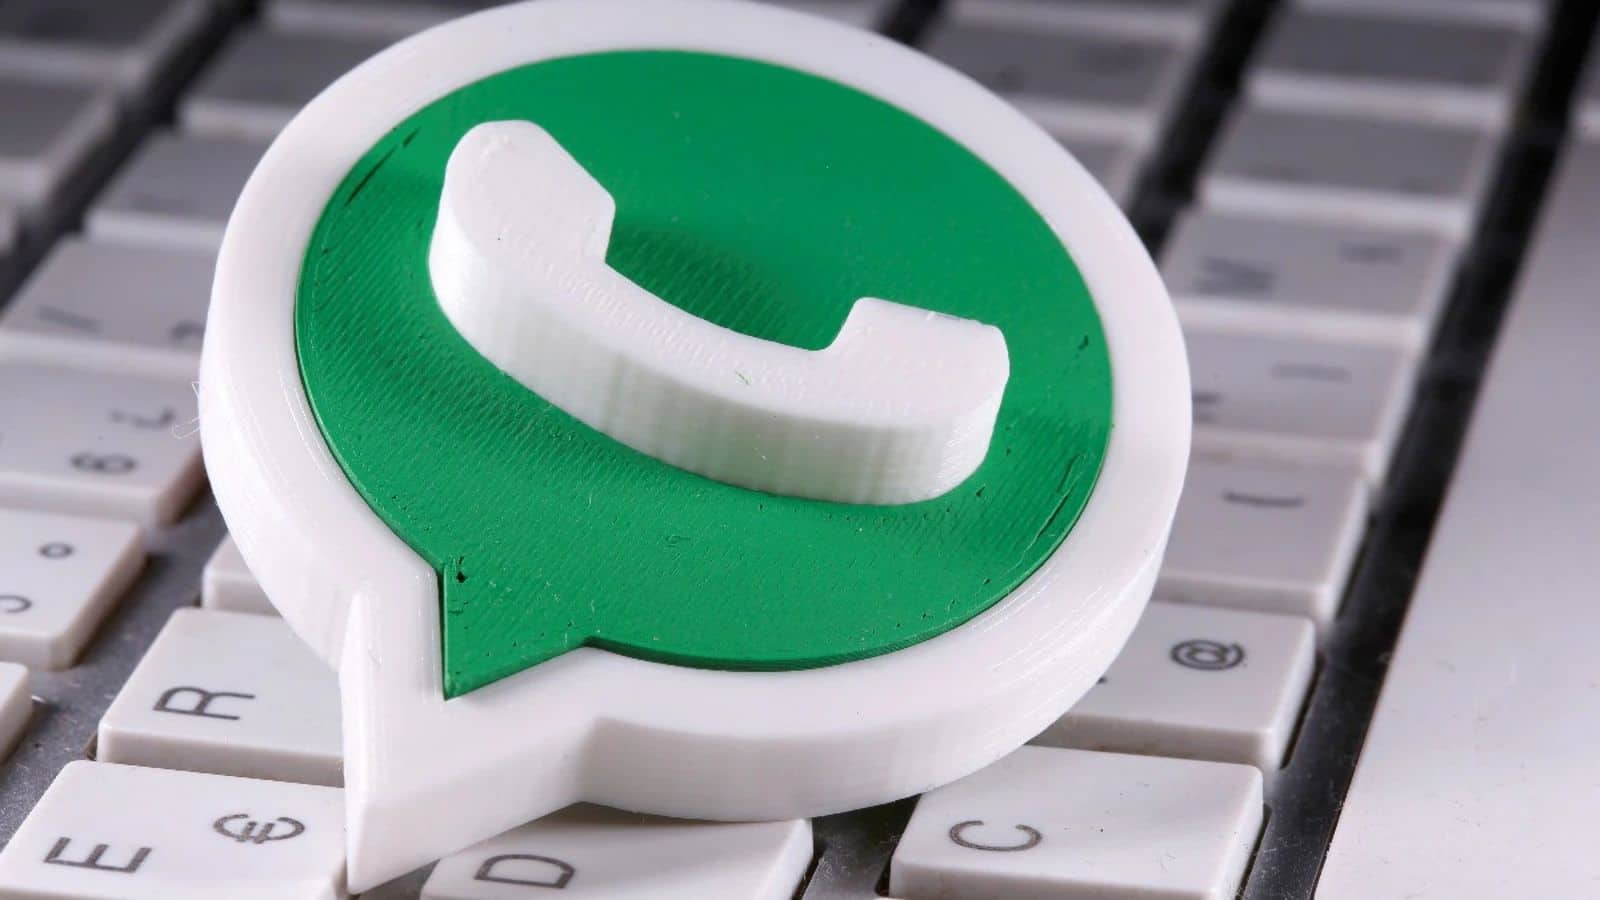 WhatsApp will let you attach notes to saved contacts